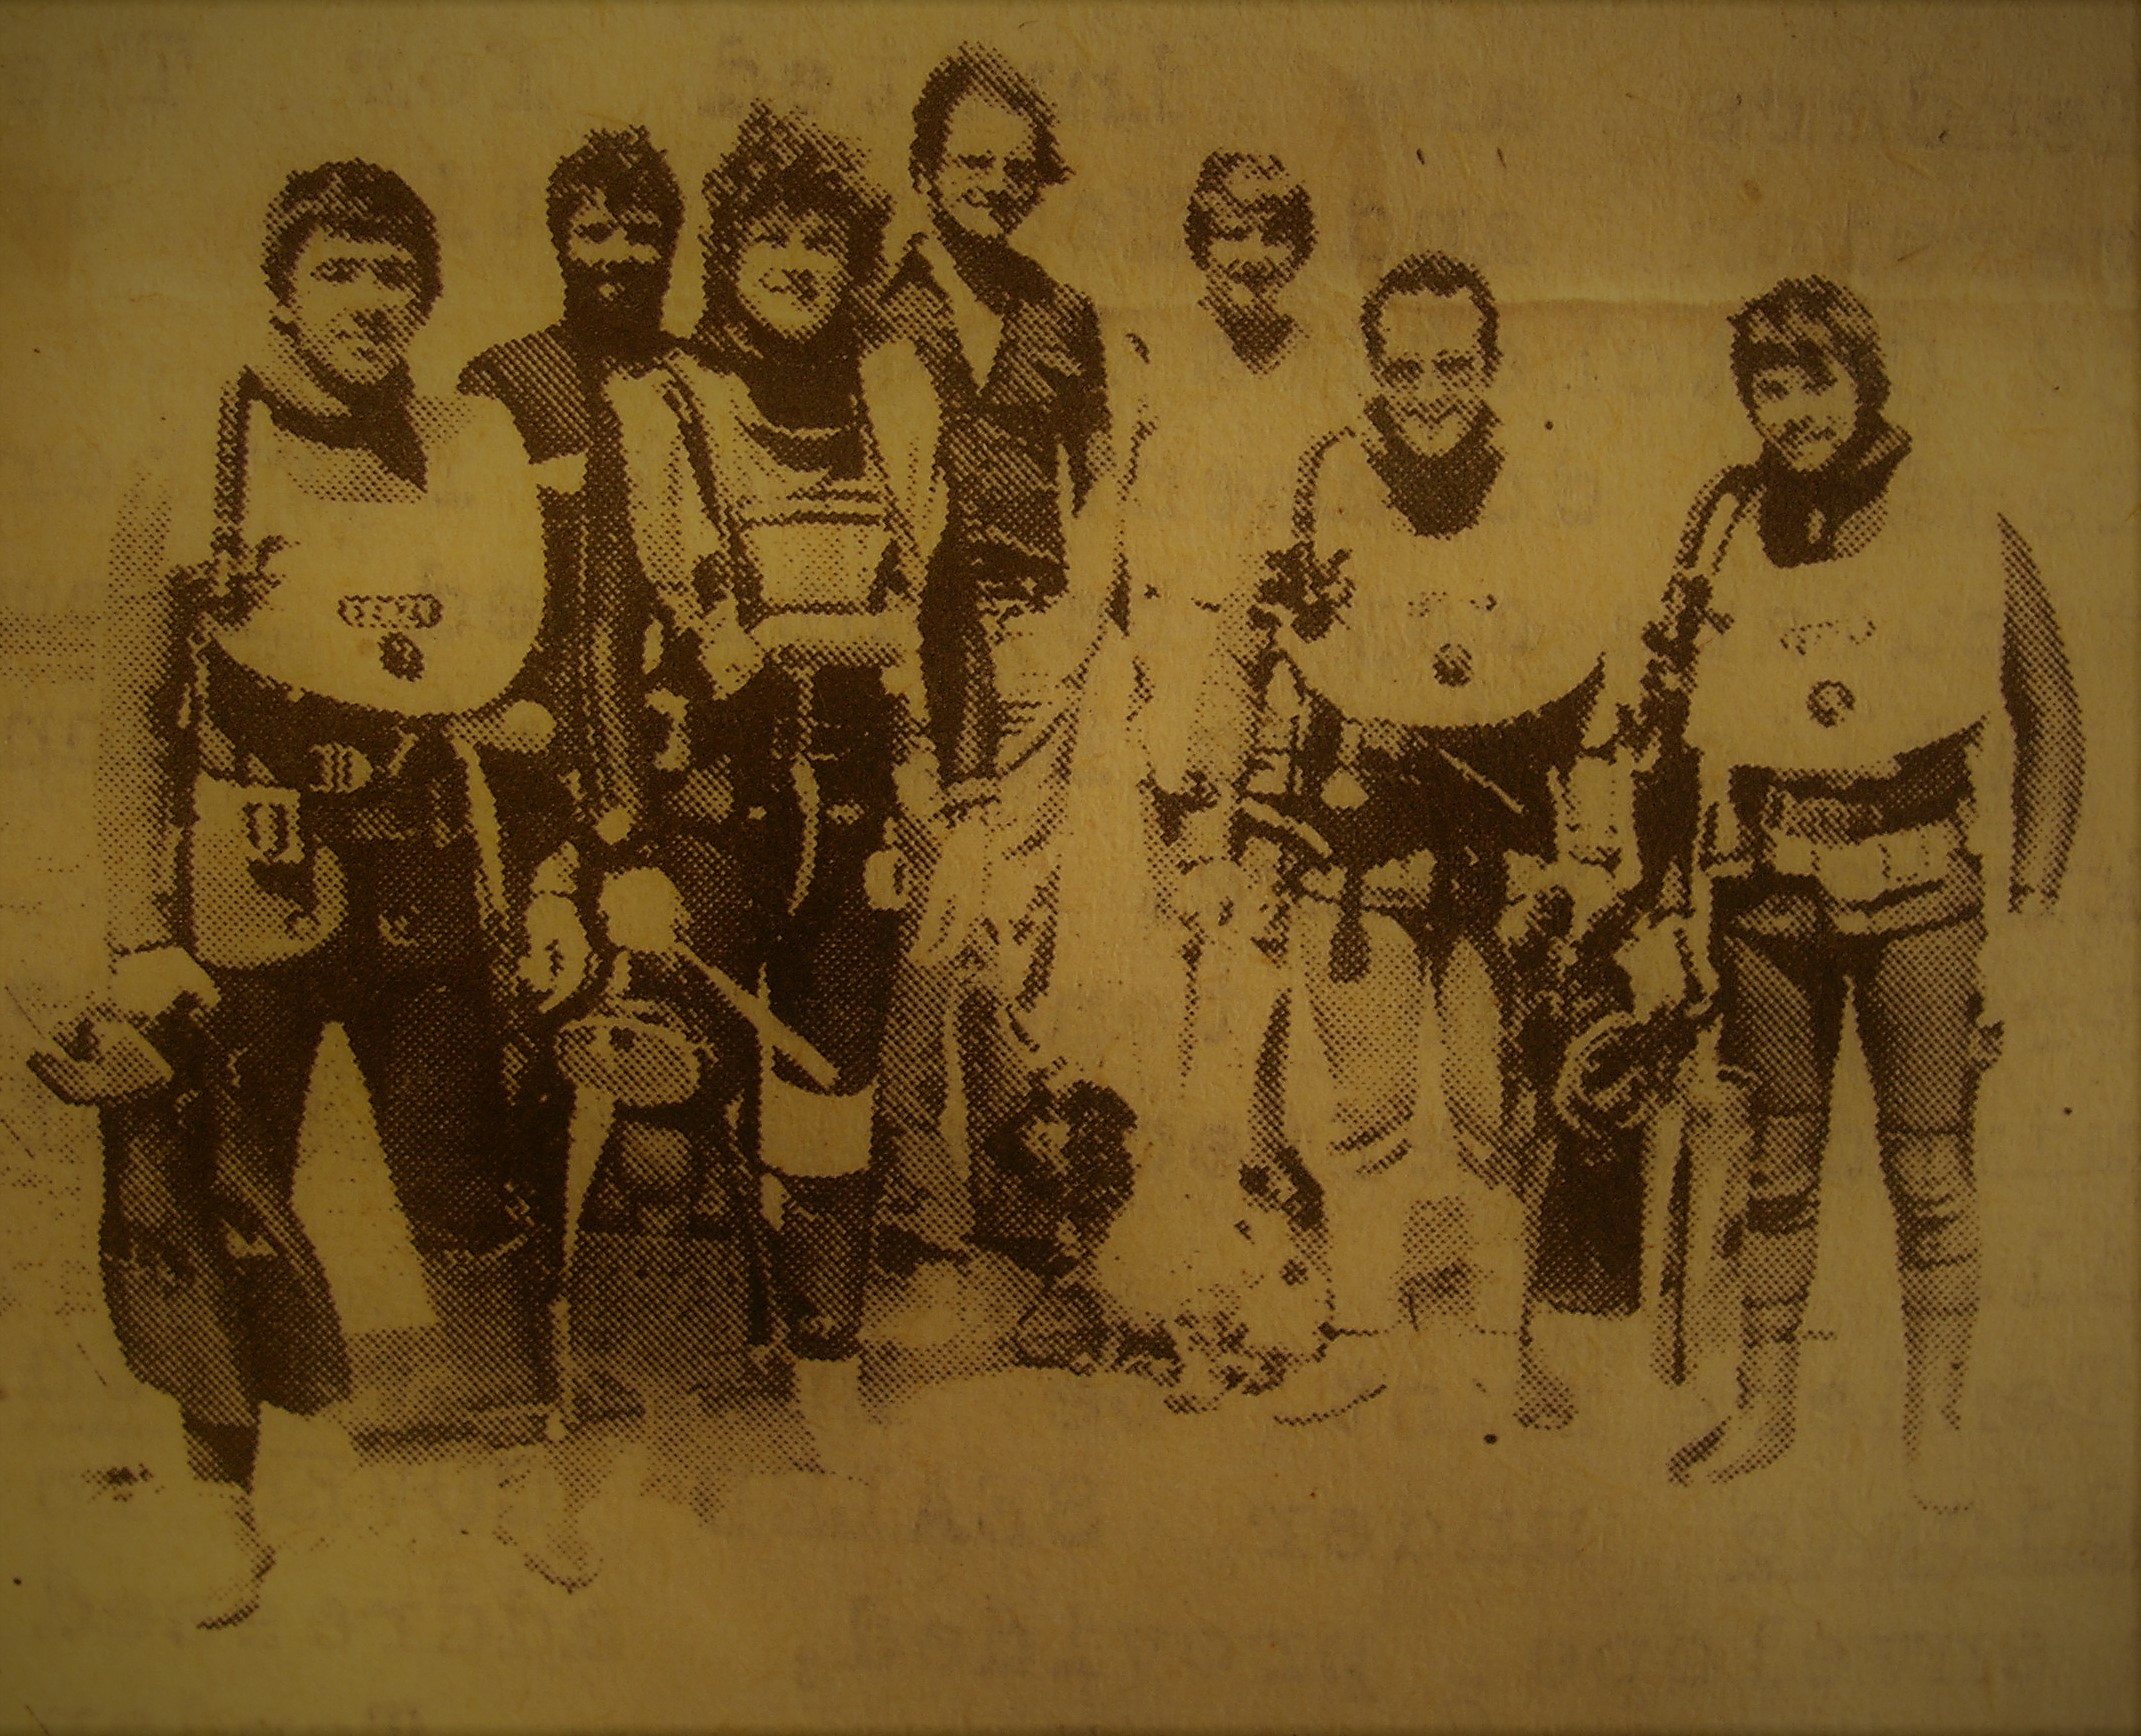 BSAC 888 Diving Club members: Harison, Azopardi, Pervis, Summerfield, Shaw, Serfaty and Santos in the 1970s